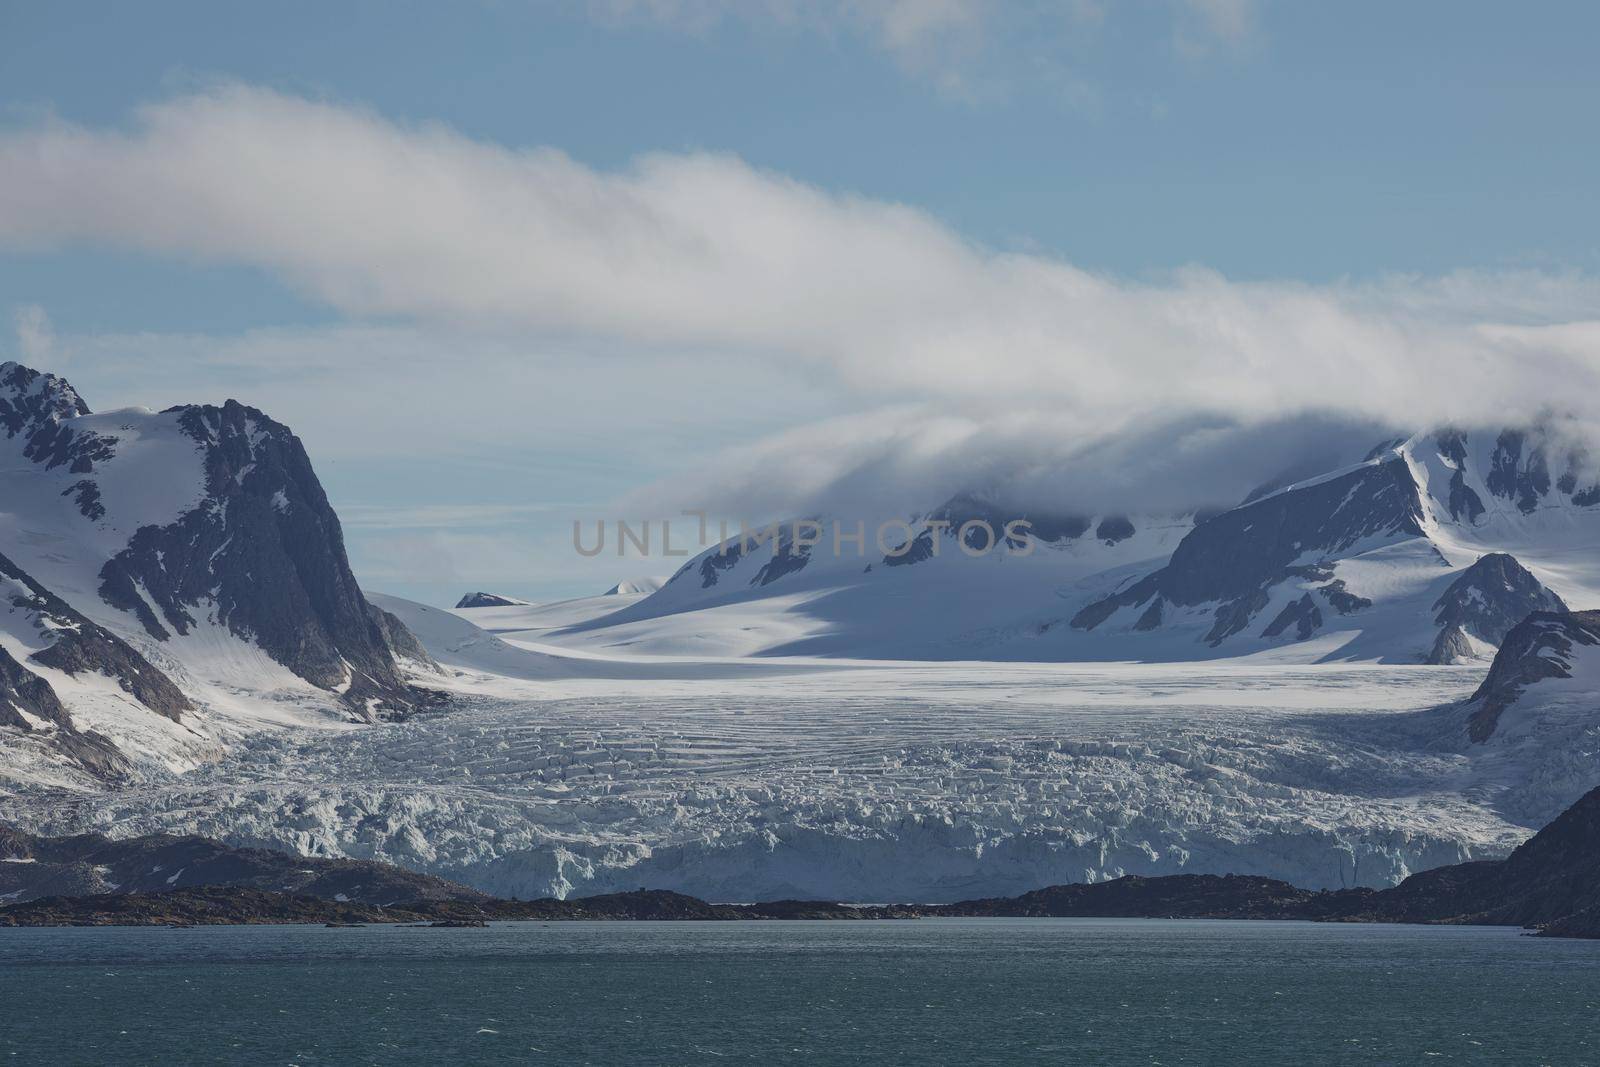 The coastline and mountains of Liefdefjord in the Svalbard Islands (Spitzbergen) in the high Arctic.